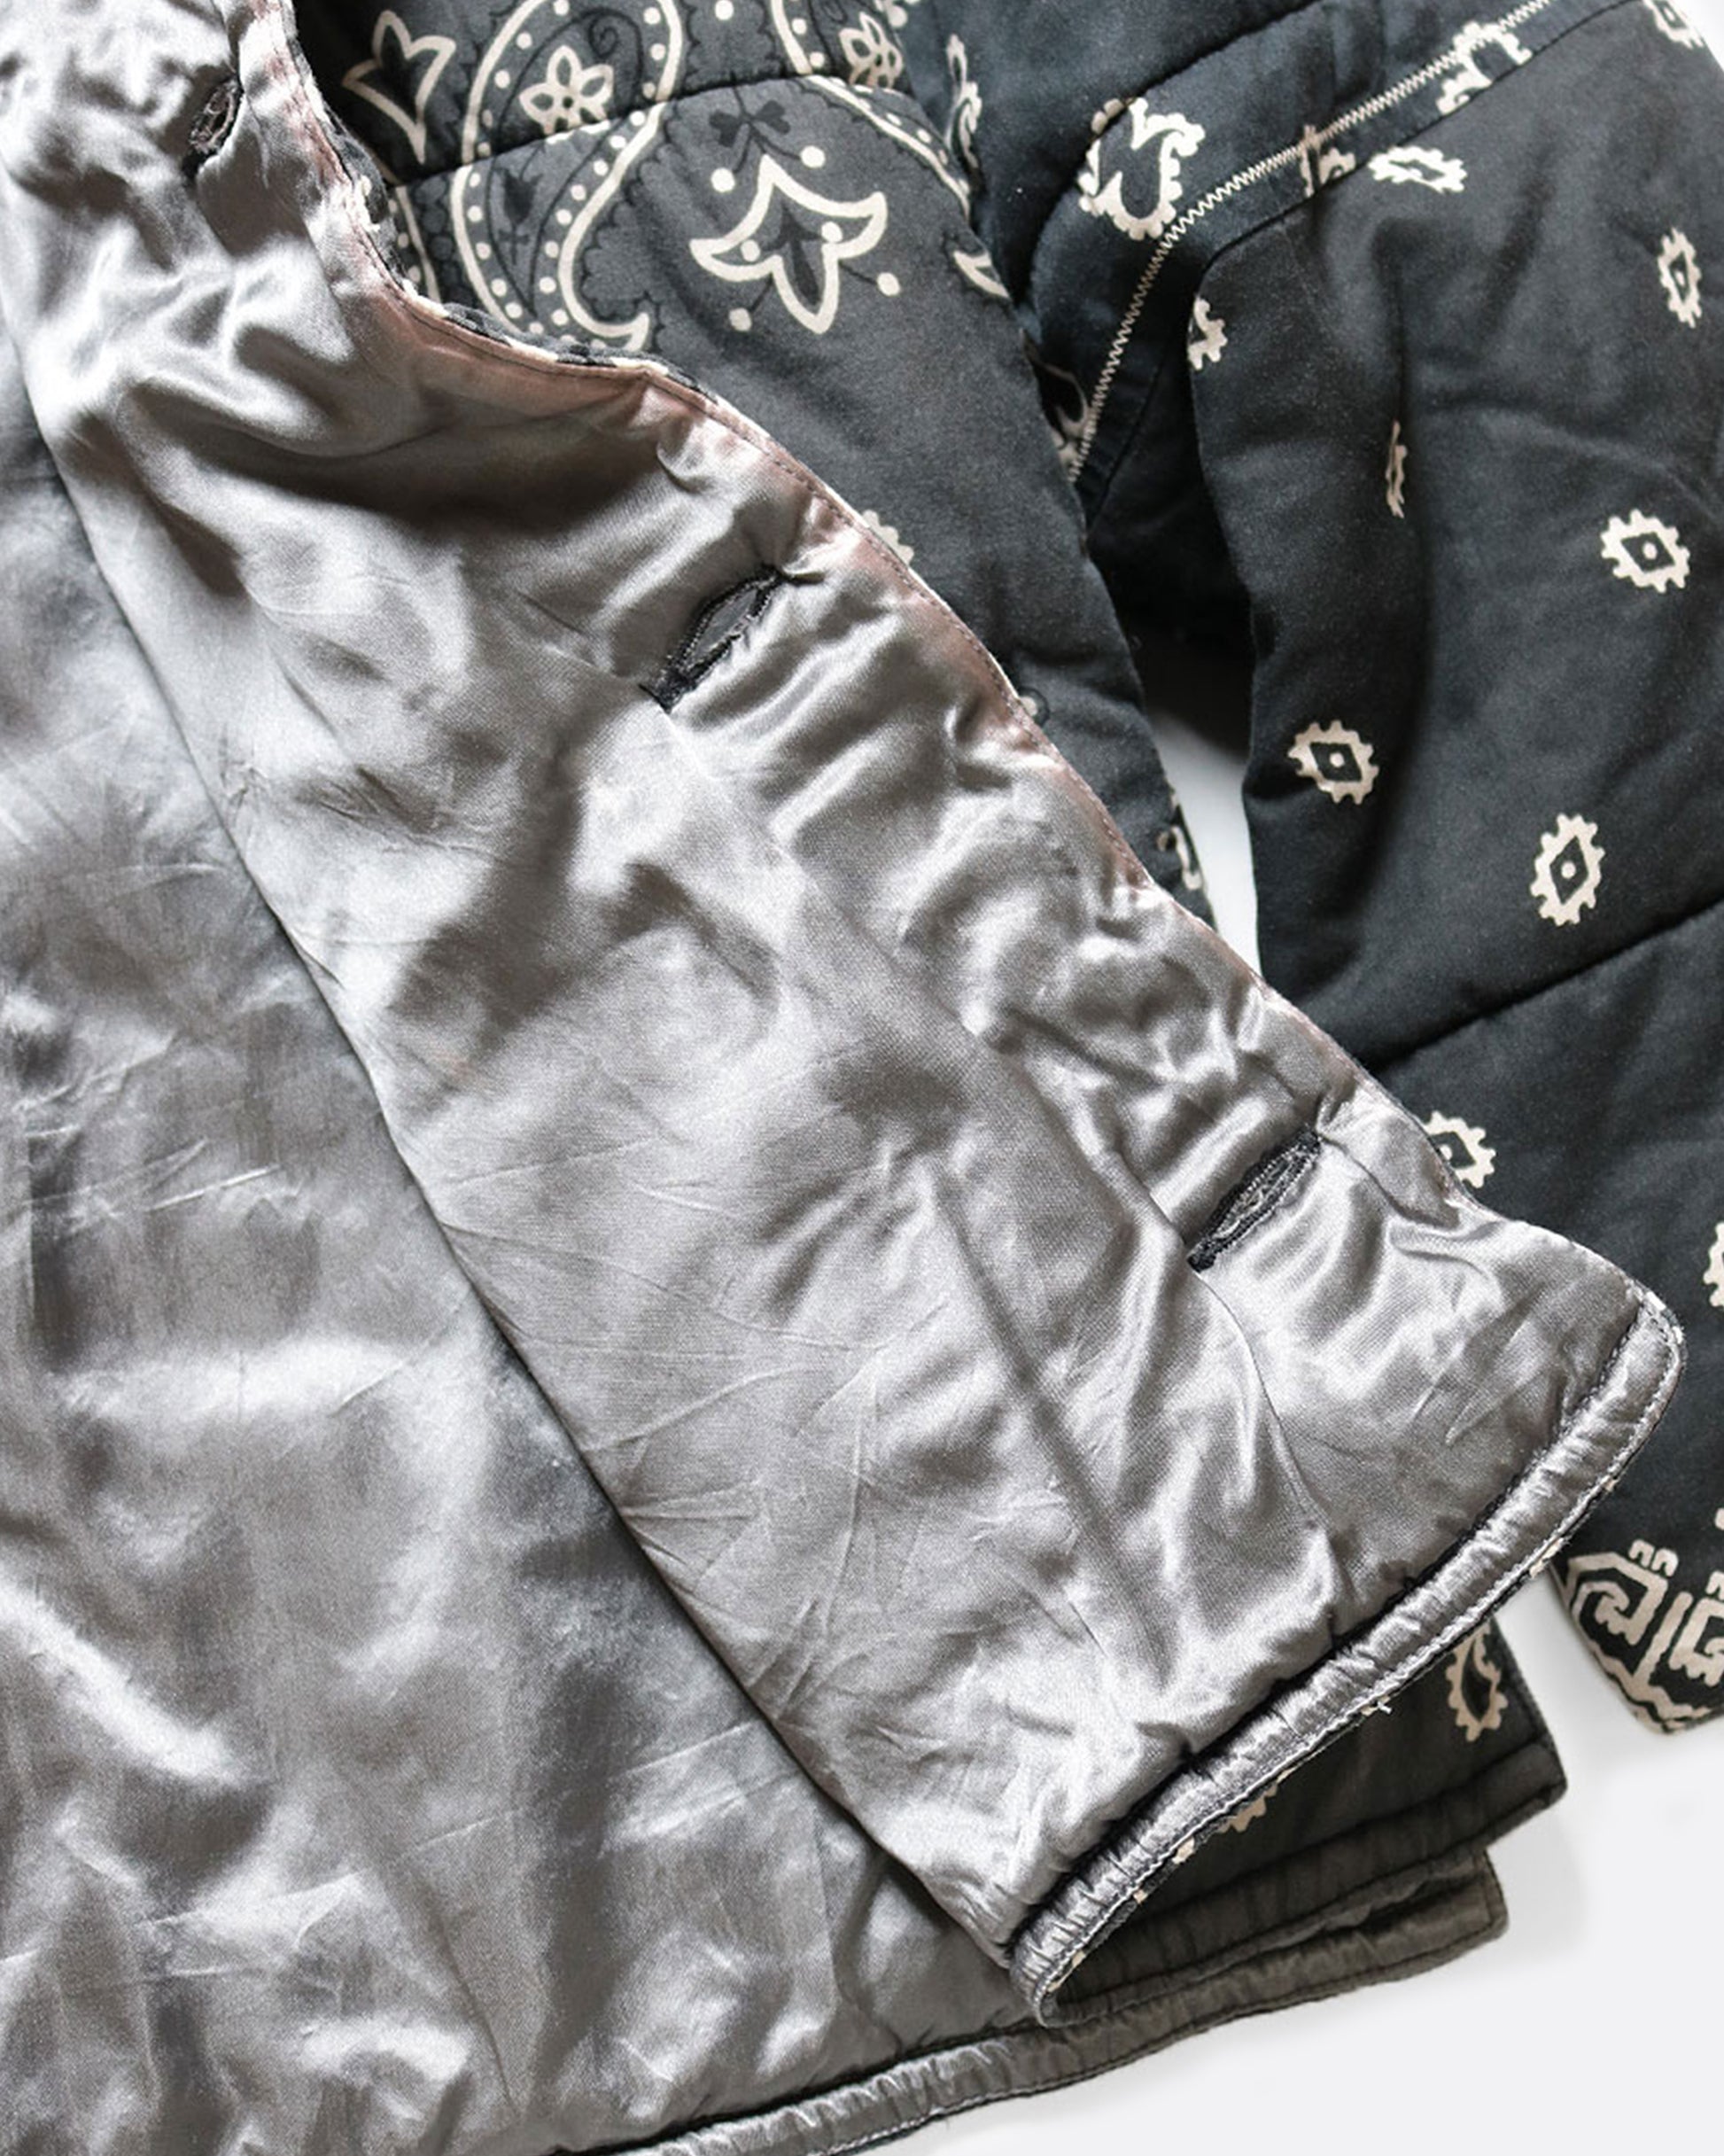 A close up of the lining on the black quilted patchwork bandana jacket.